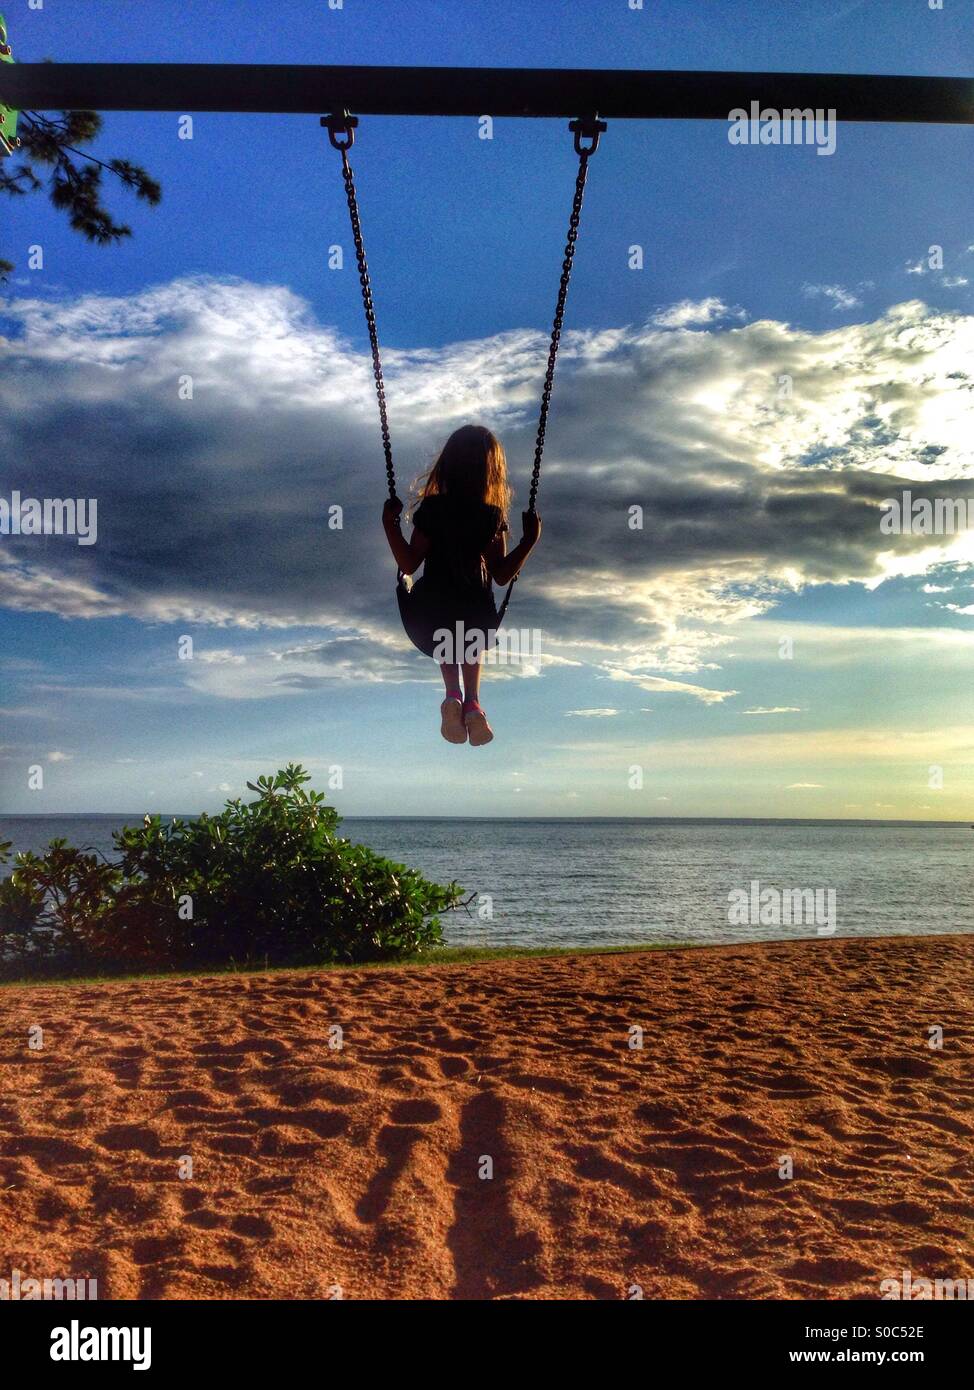 Young girl on a swing at the beach. Stock Photo